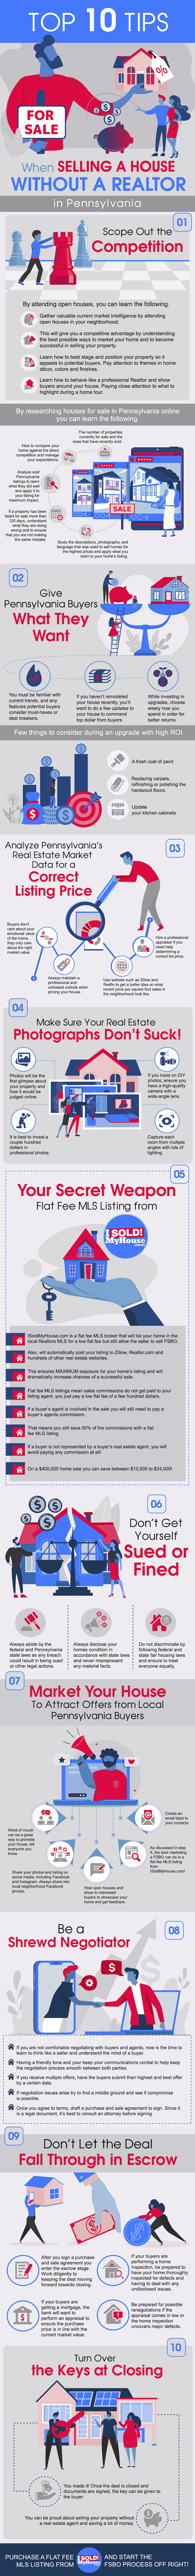 infographic of the 10 steps to sell a house in pennsylvania without an agent